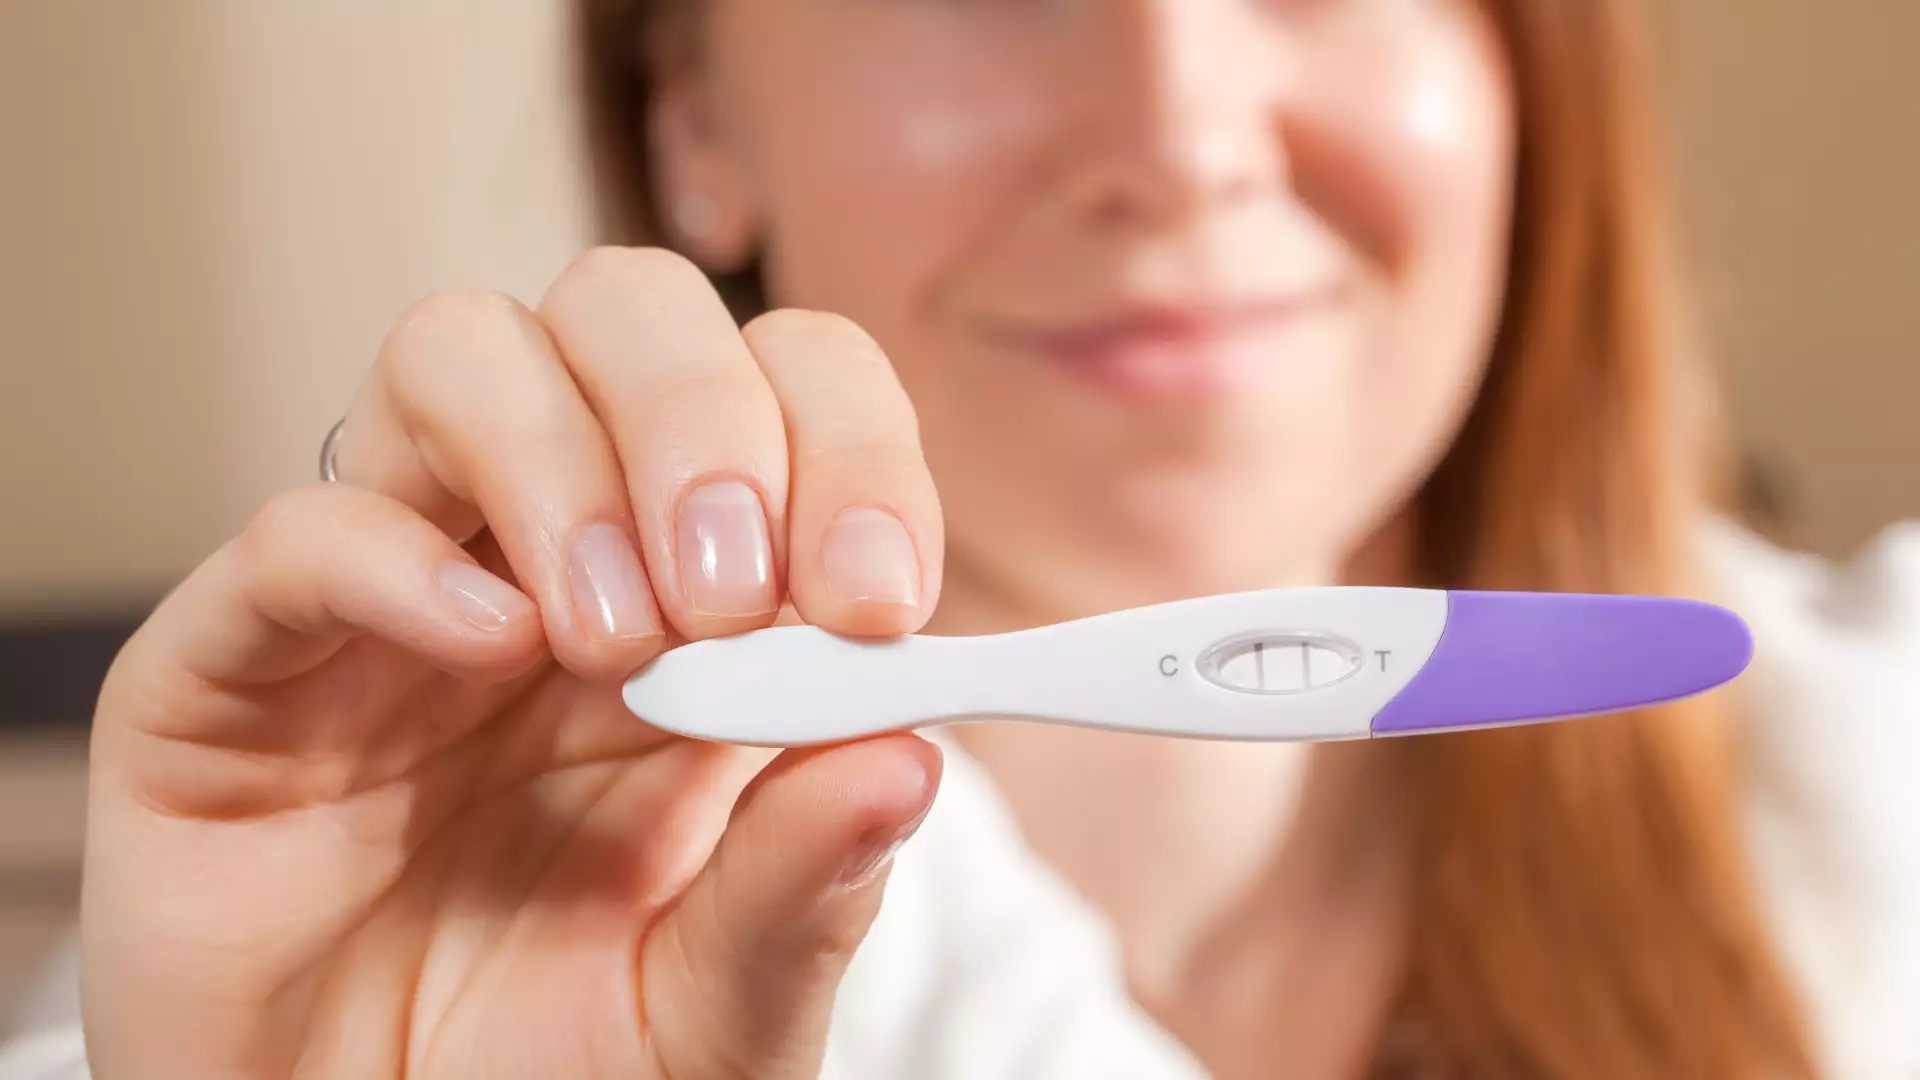 How and When Should a Pregnancy Test Be Performed?